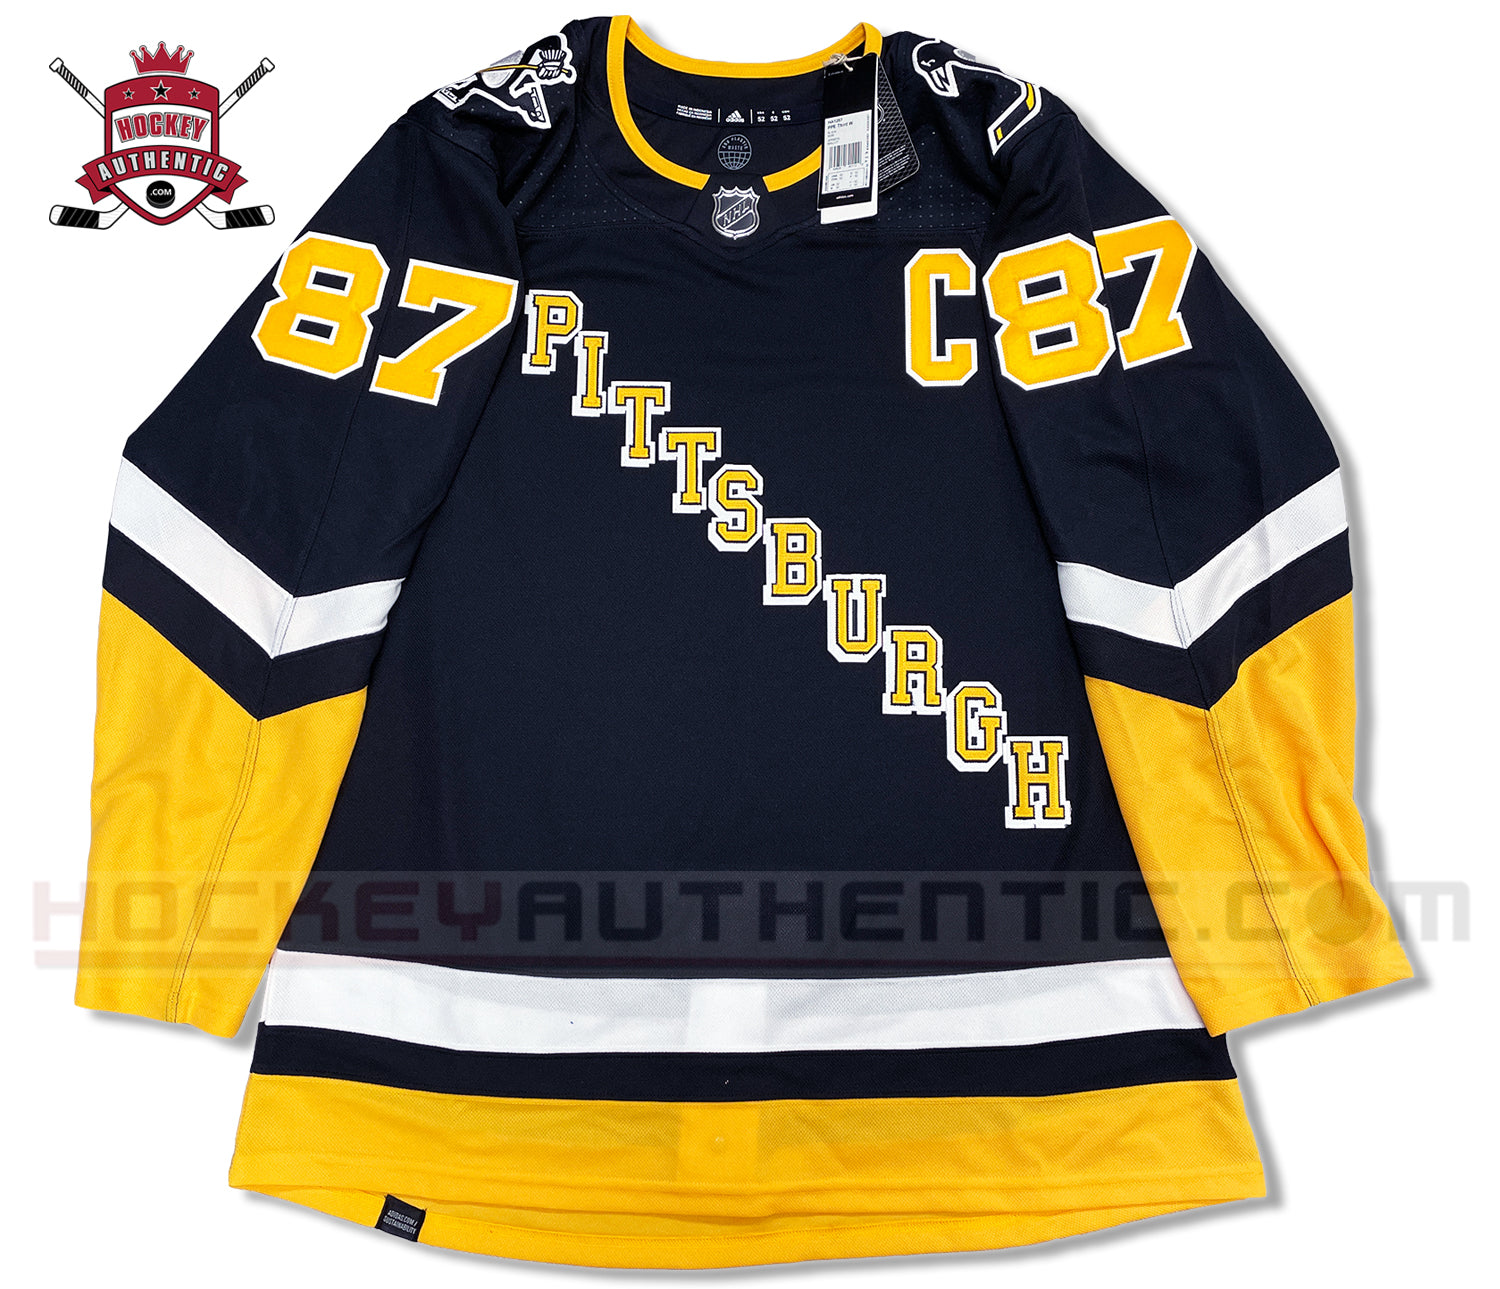 This leaked Penguins jersey may be a first look at Adidas' NHL